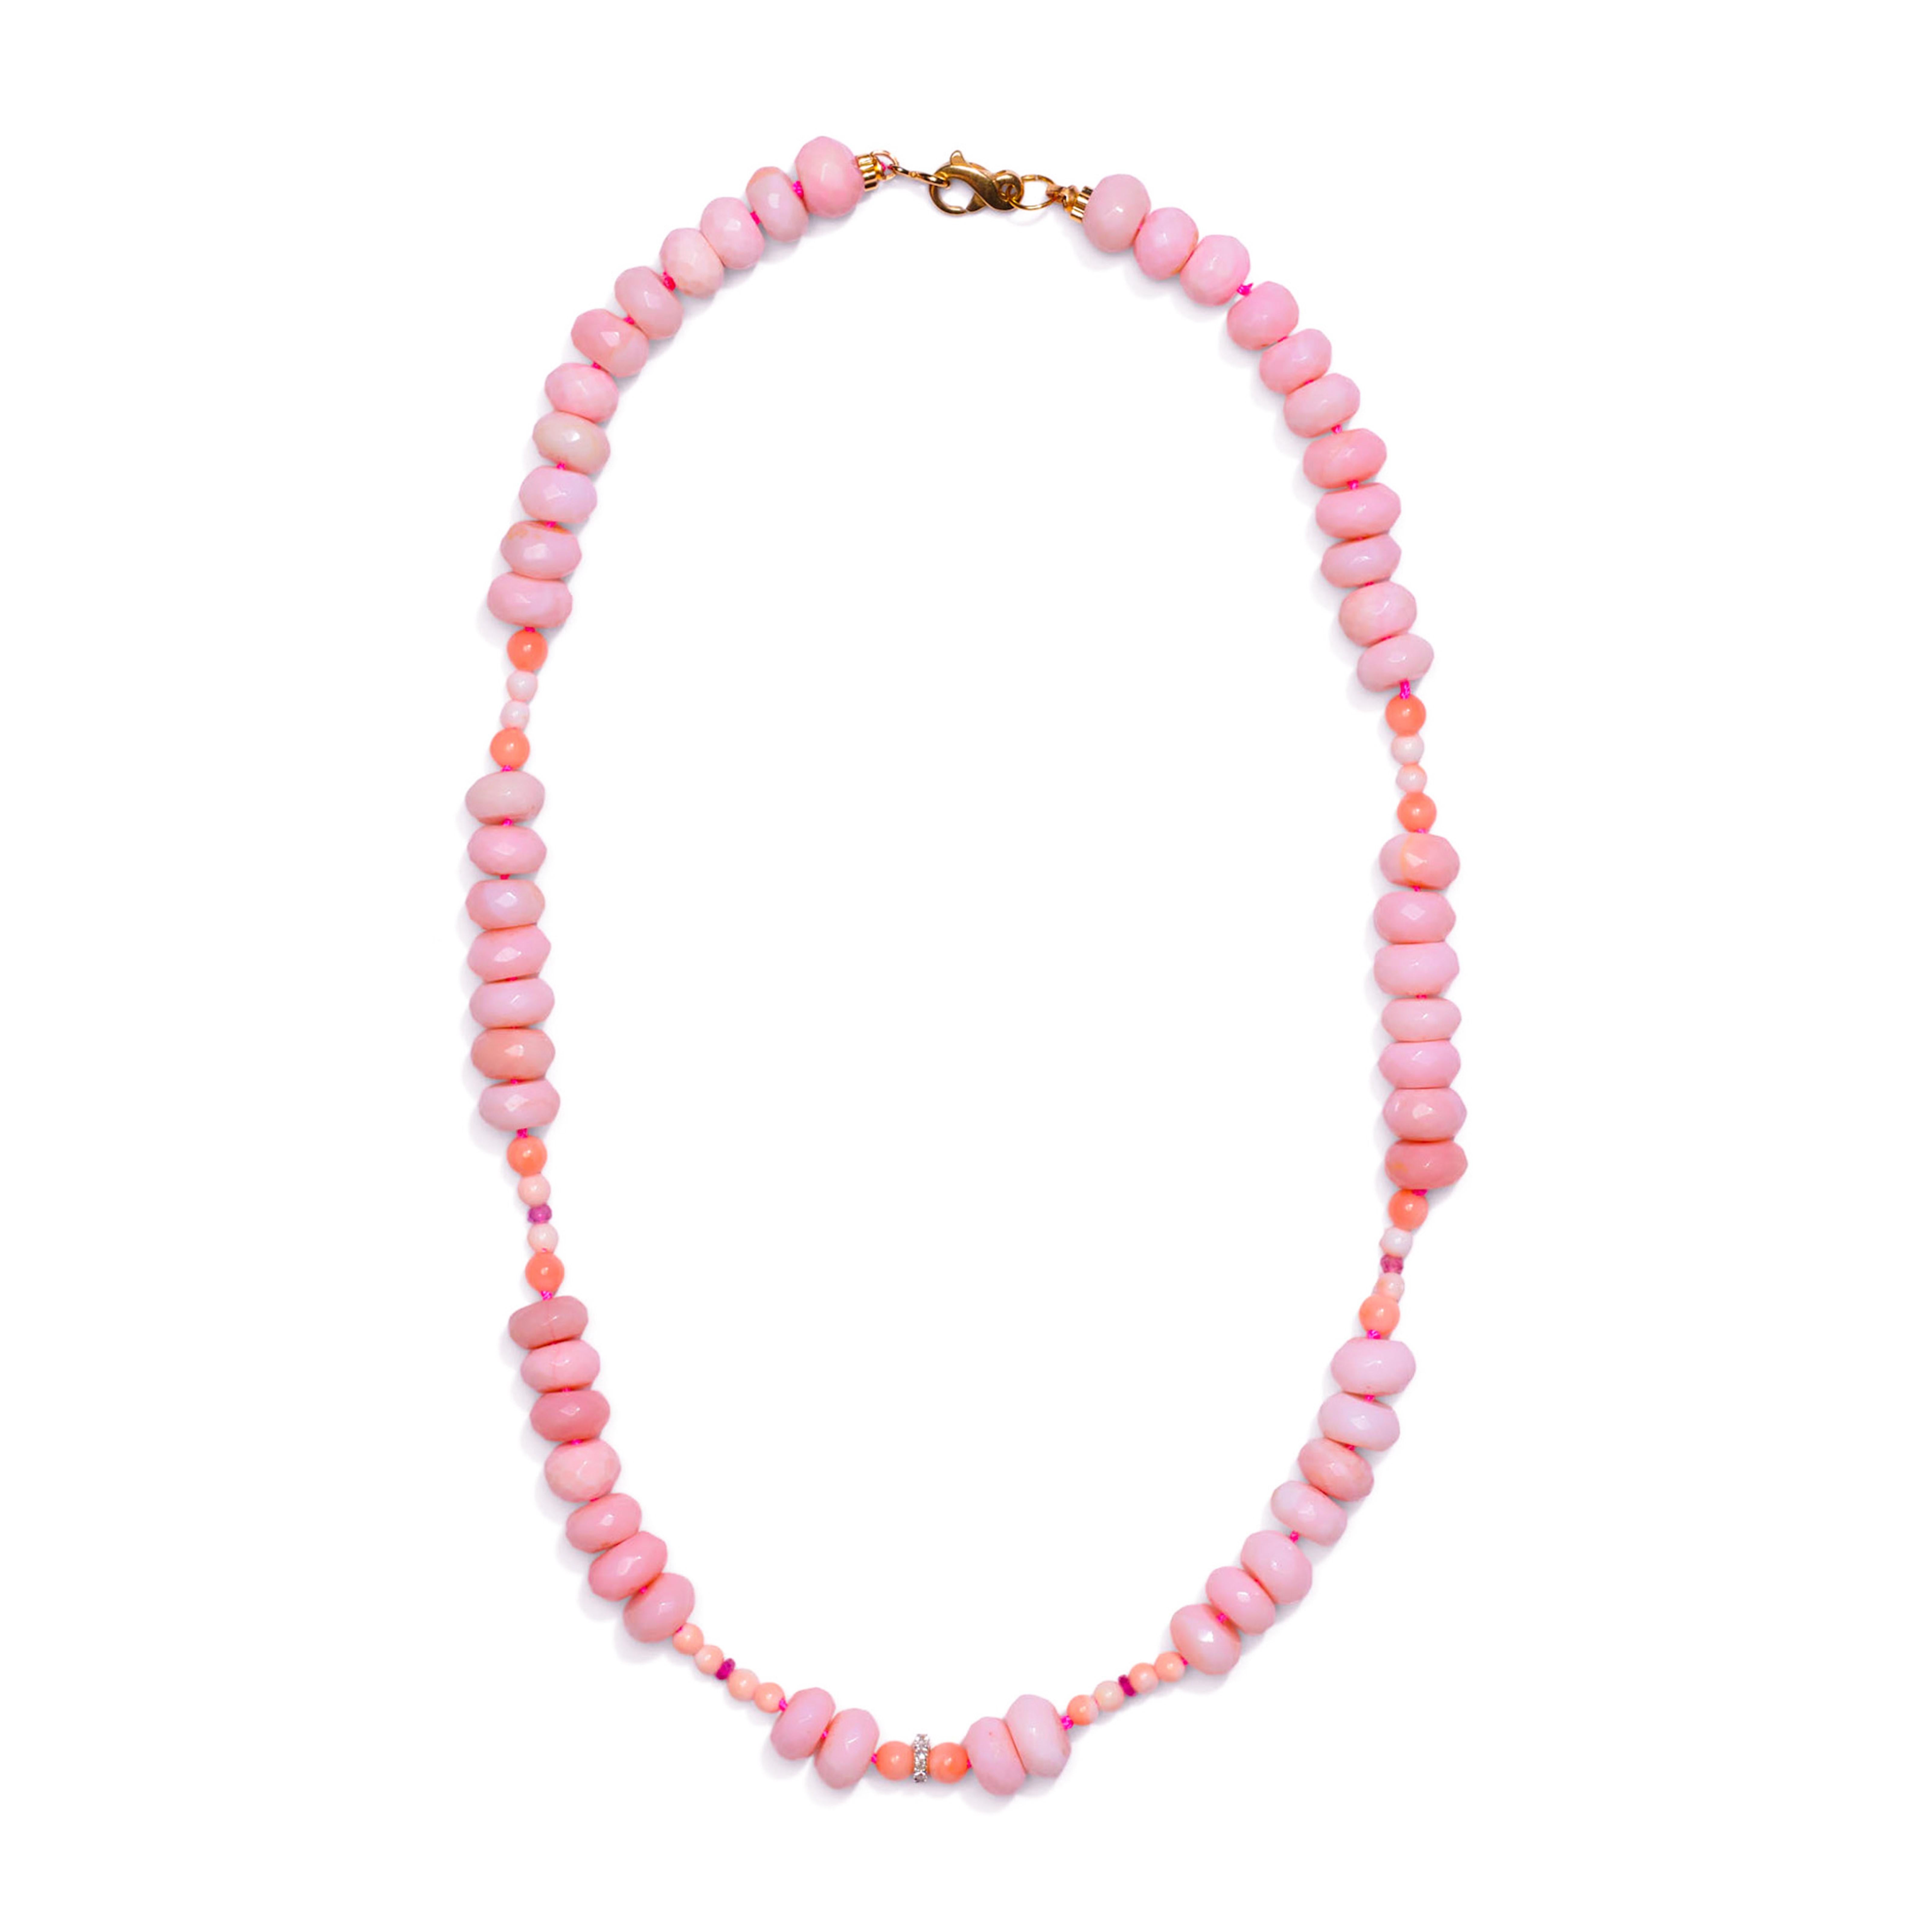 120 Carat Pink Diamond Sapphire Necklace with Pink Peruvian Opal in 14K Gold